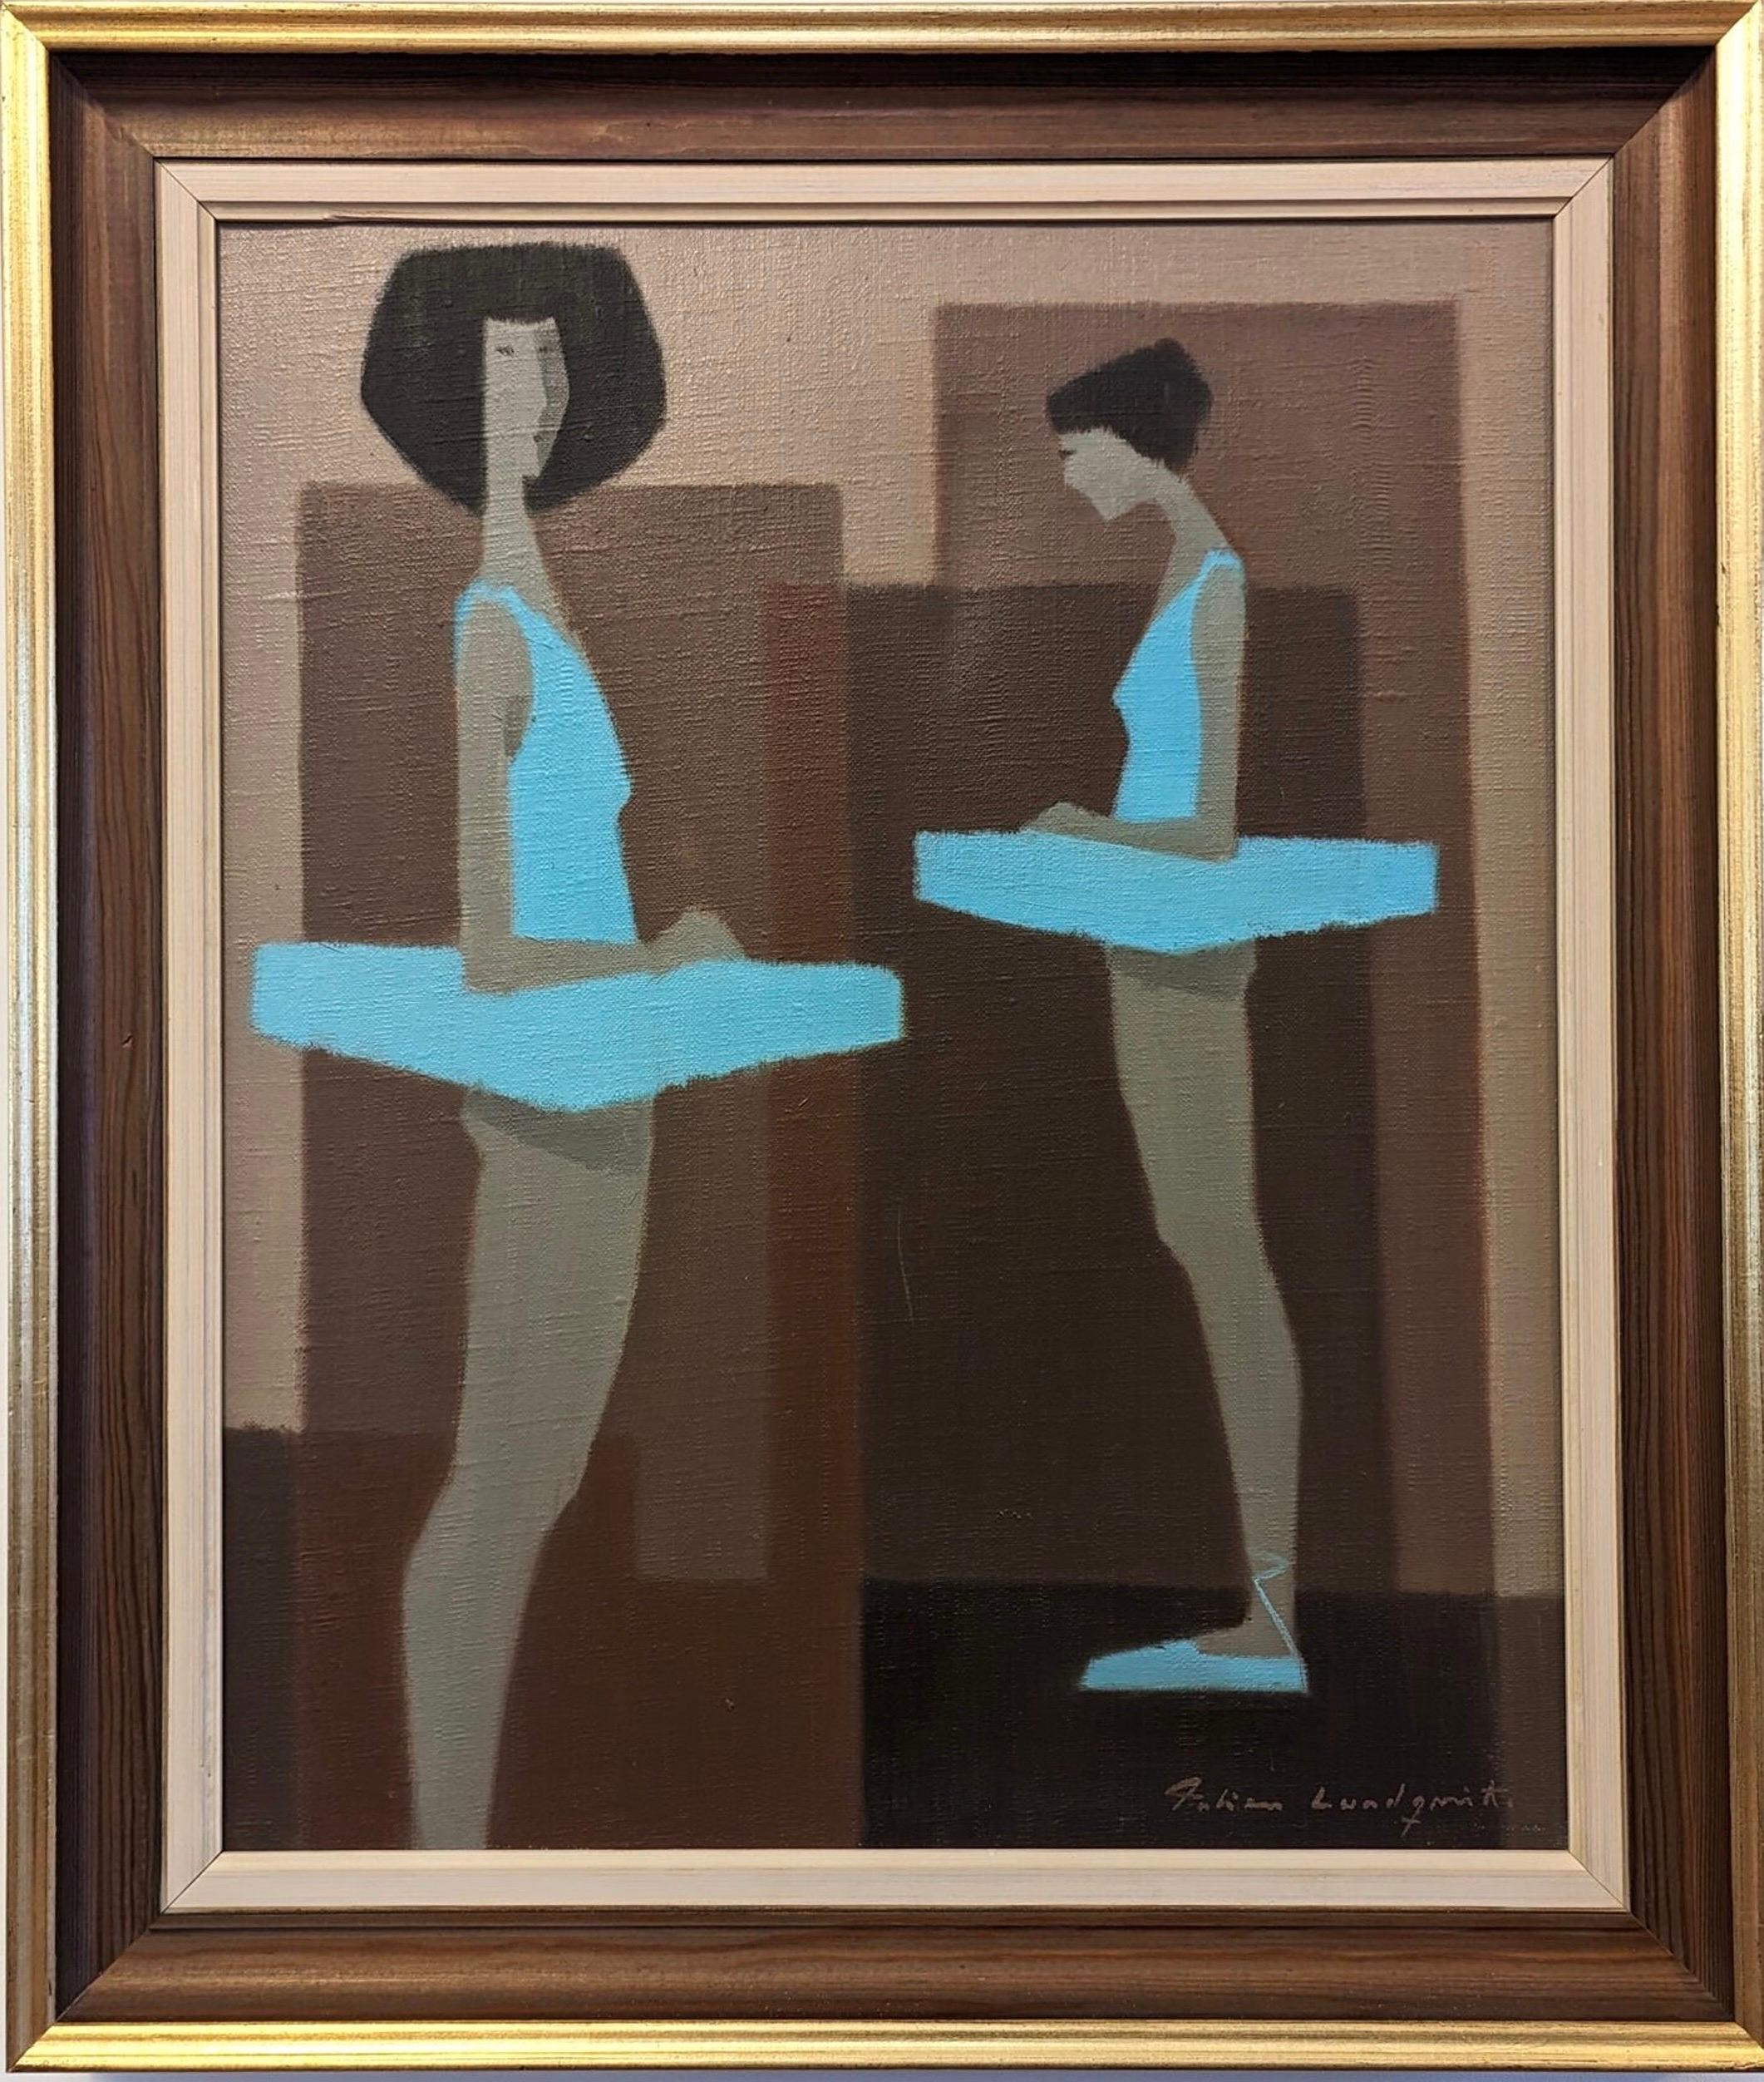 BLUE BALLERINAS
Size: 55 x 47 cm (including frame)
Oil on Canvas

An outstanding mid-century figurative composition, executed in oil onto canvas by the established Swedish artist Fabian Lundqvist (1913-1989), whose works have been represented in